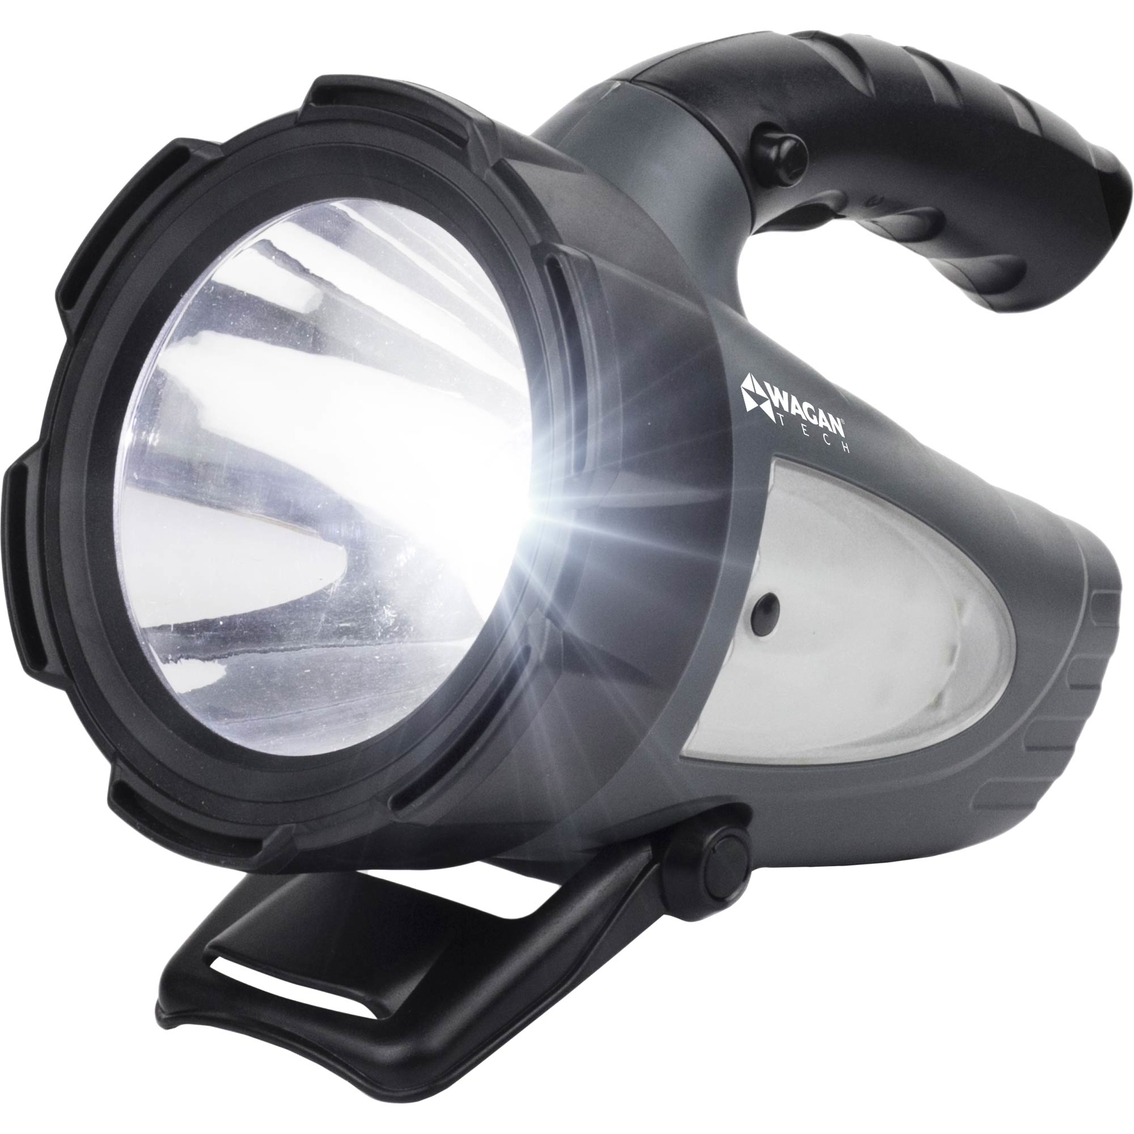 Wagan Brite-Nite Defender 300 LED Rechargeable Spotlight - Image 3 of 4